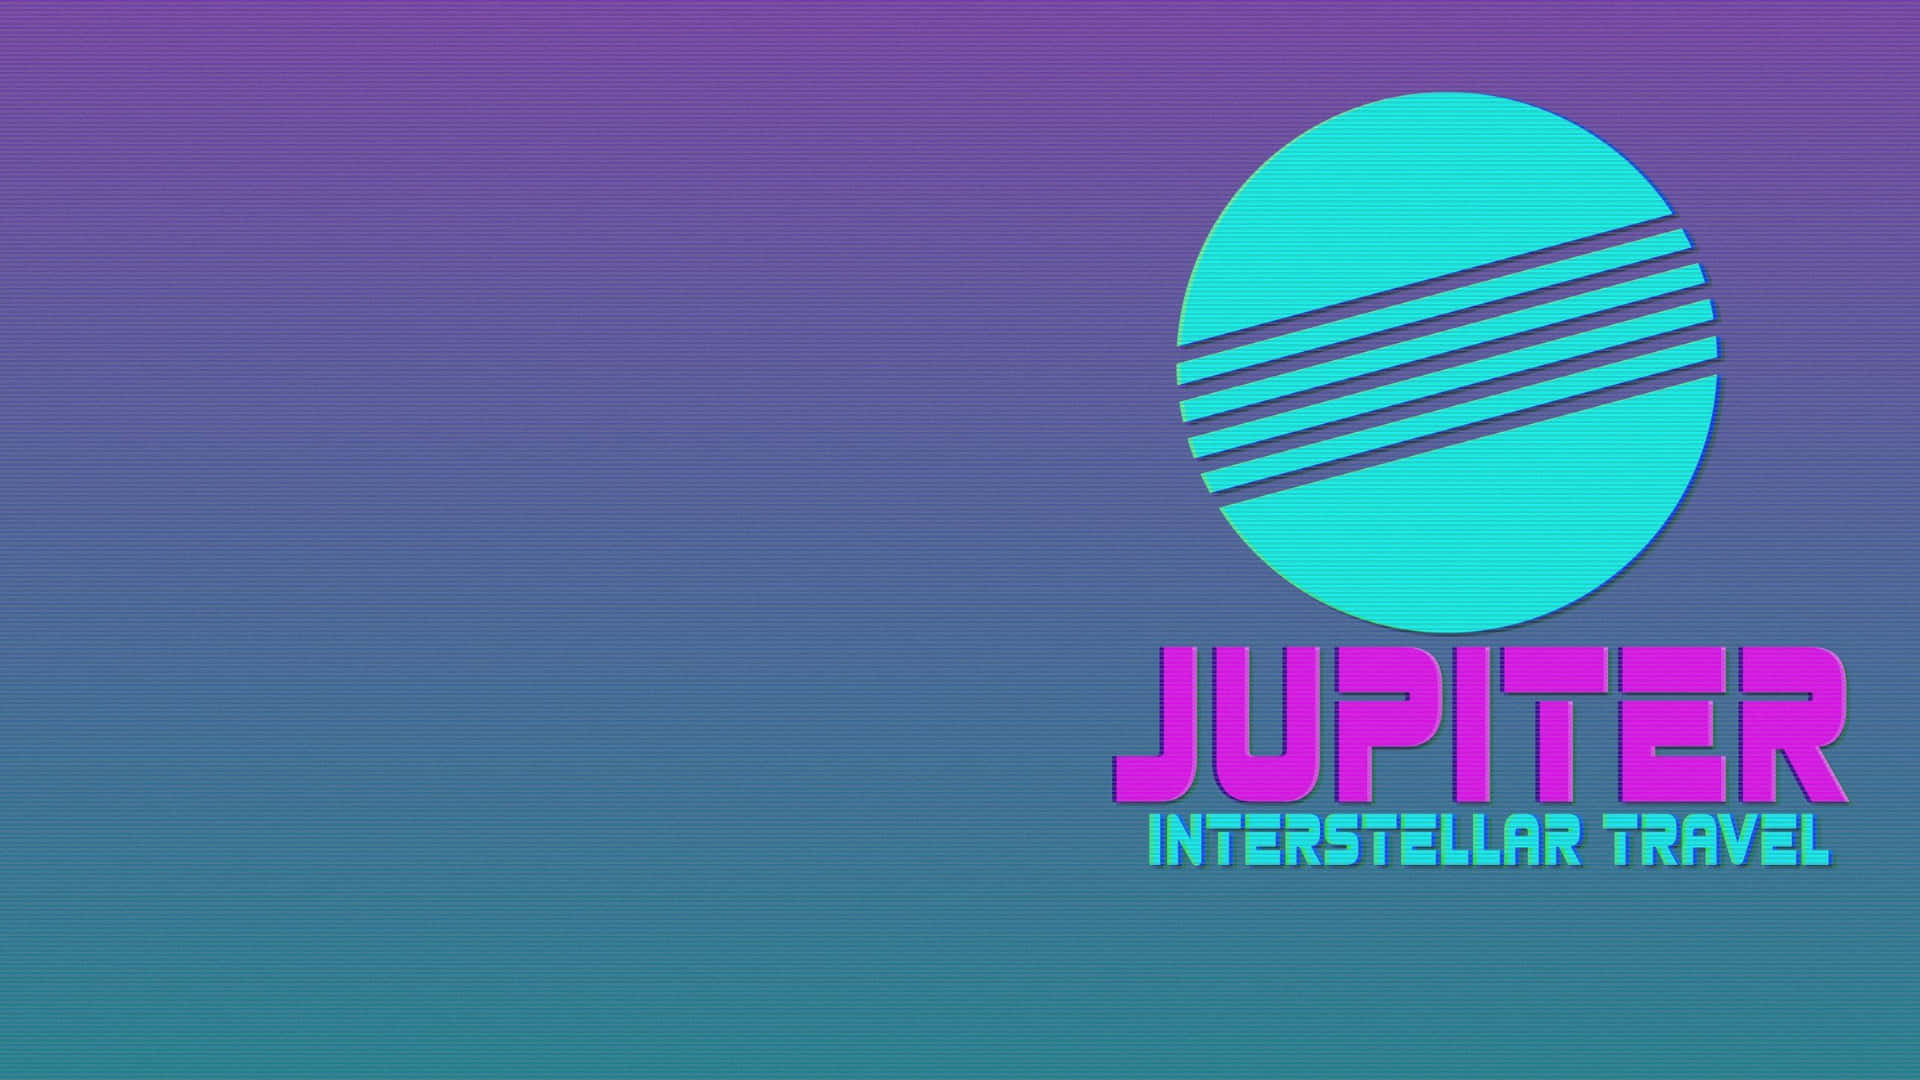 Neon lights and chill vibes - living it up in the 80s. Wallpaper